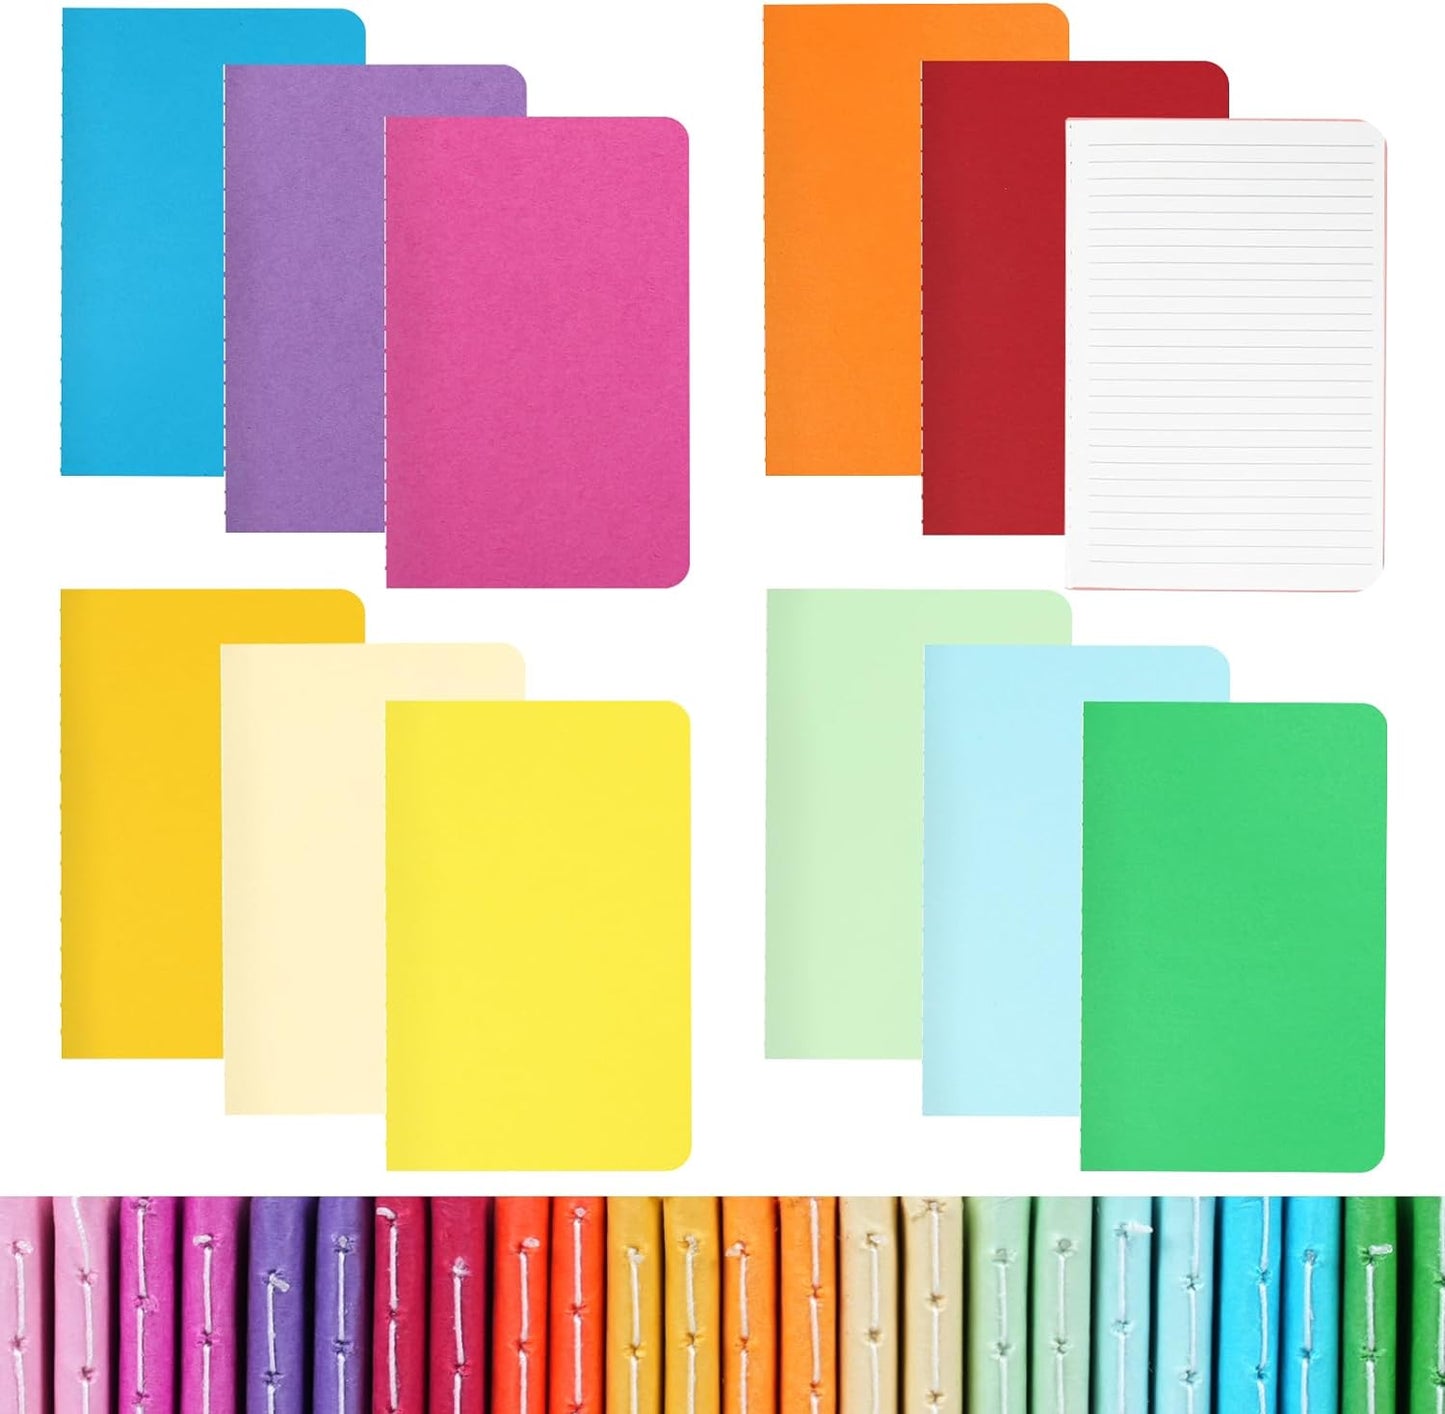 24Pcs A6 Blank Notebooks for Write Stories, Bulk Small Notebooks Journals for Students, Drawing, Blank Mini Pocket Notebooks 12 Colors 3.5X5.5